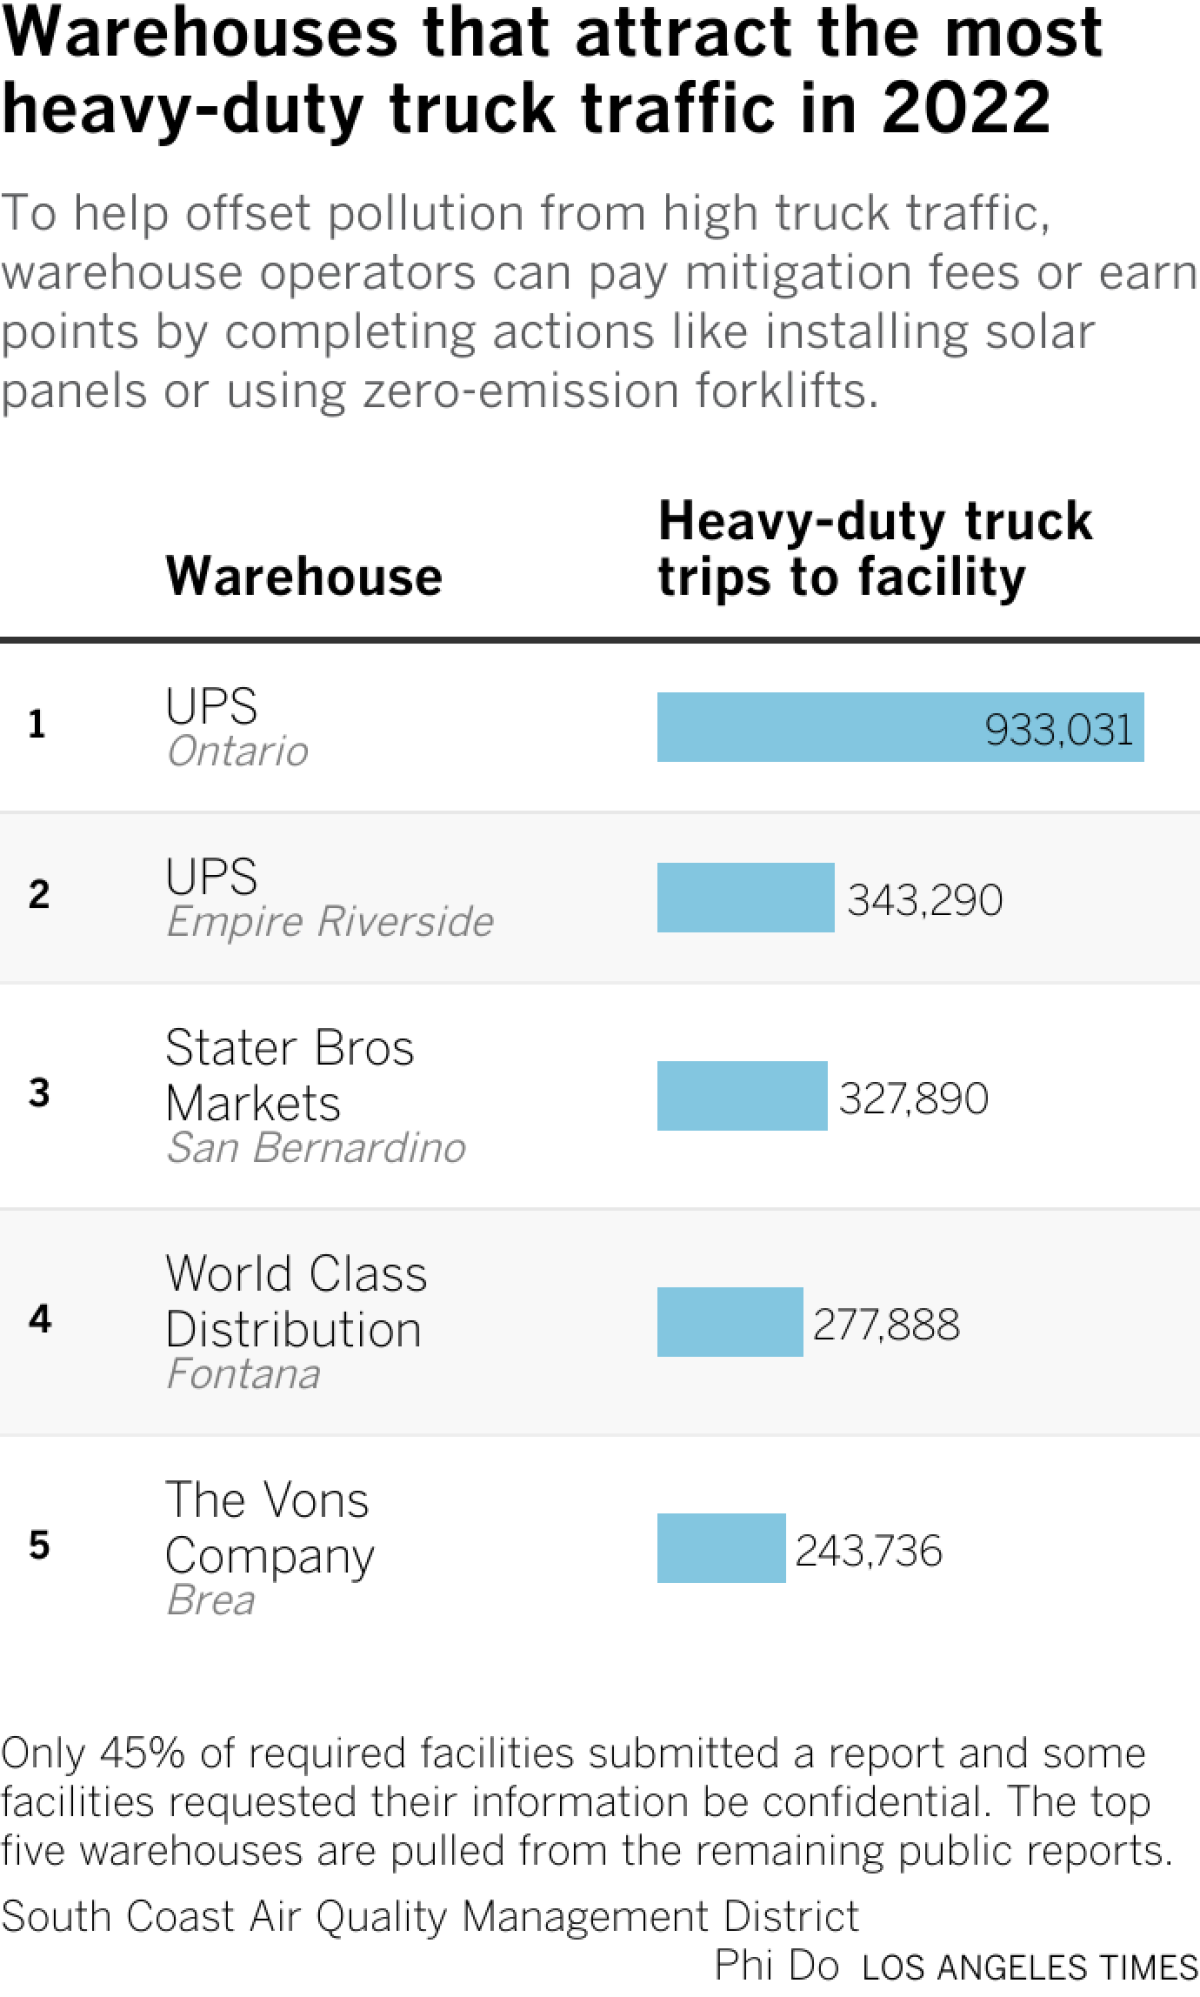 Table showing the top five warehouses with the most heavy-duty truck traffic in 2022